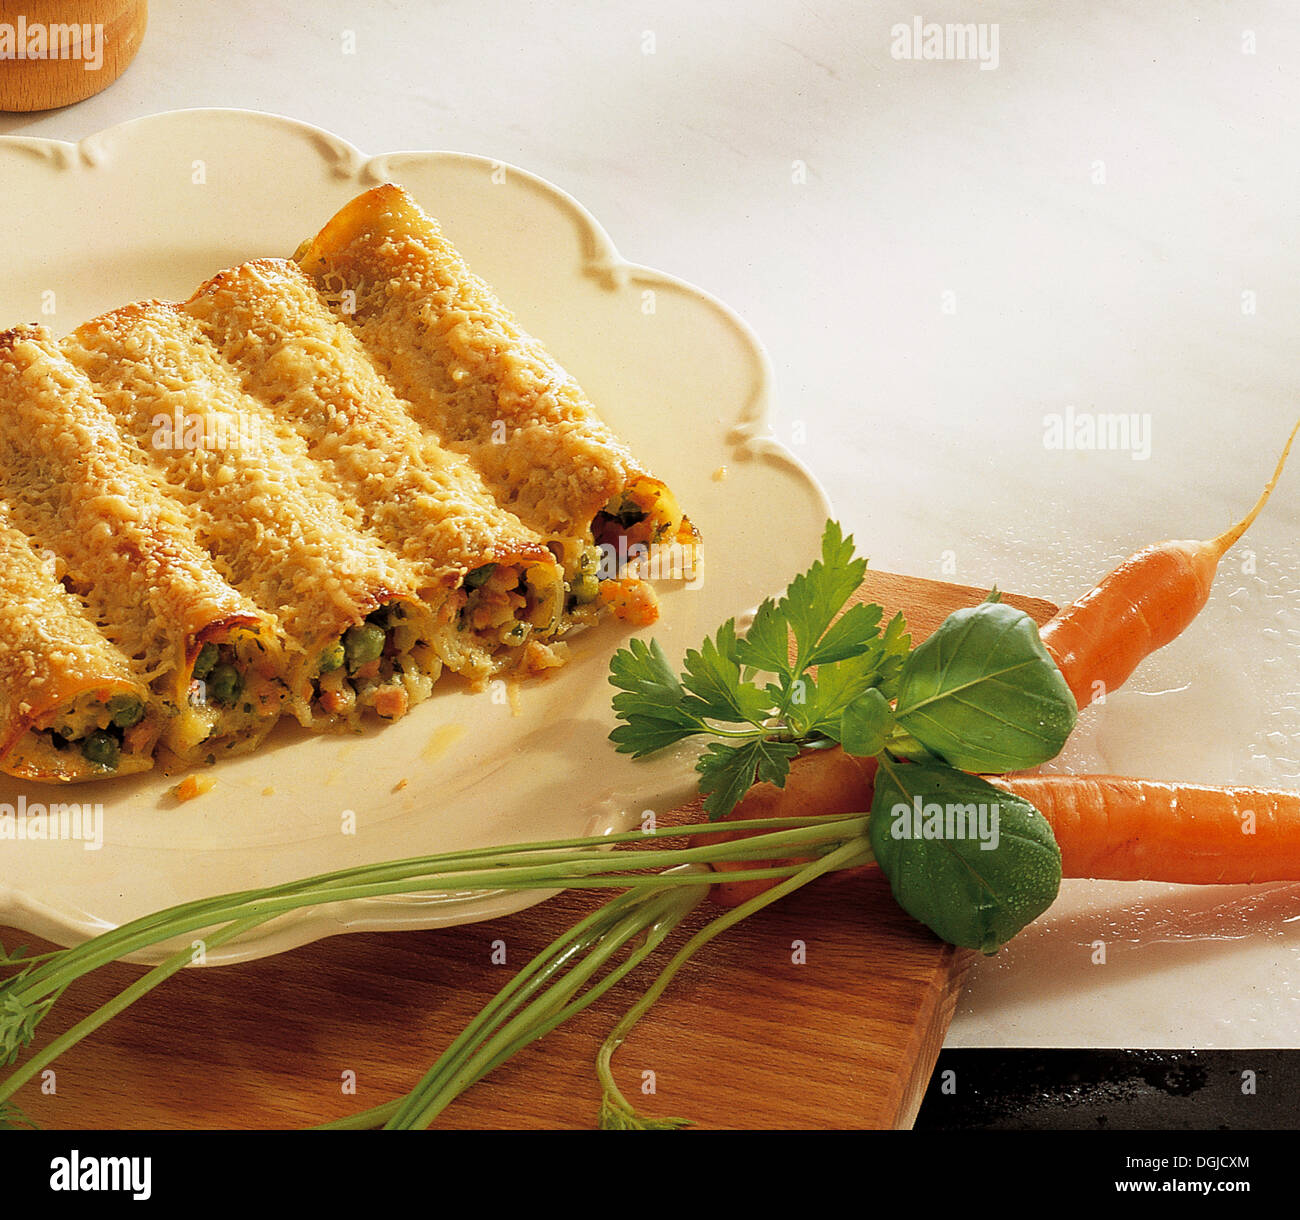 Cannelloni with vegetables, the Netherlands. Stock Photo